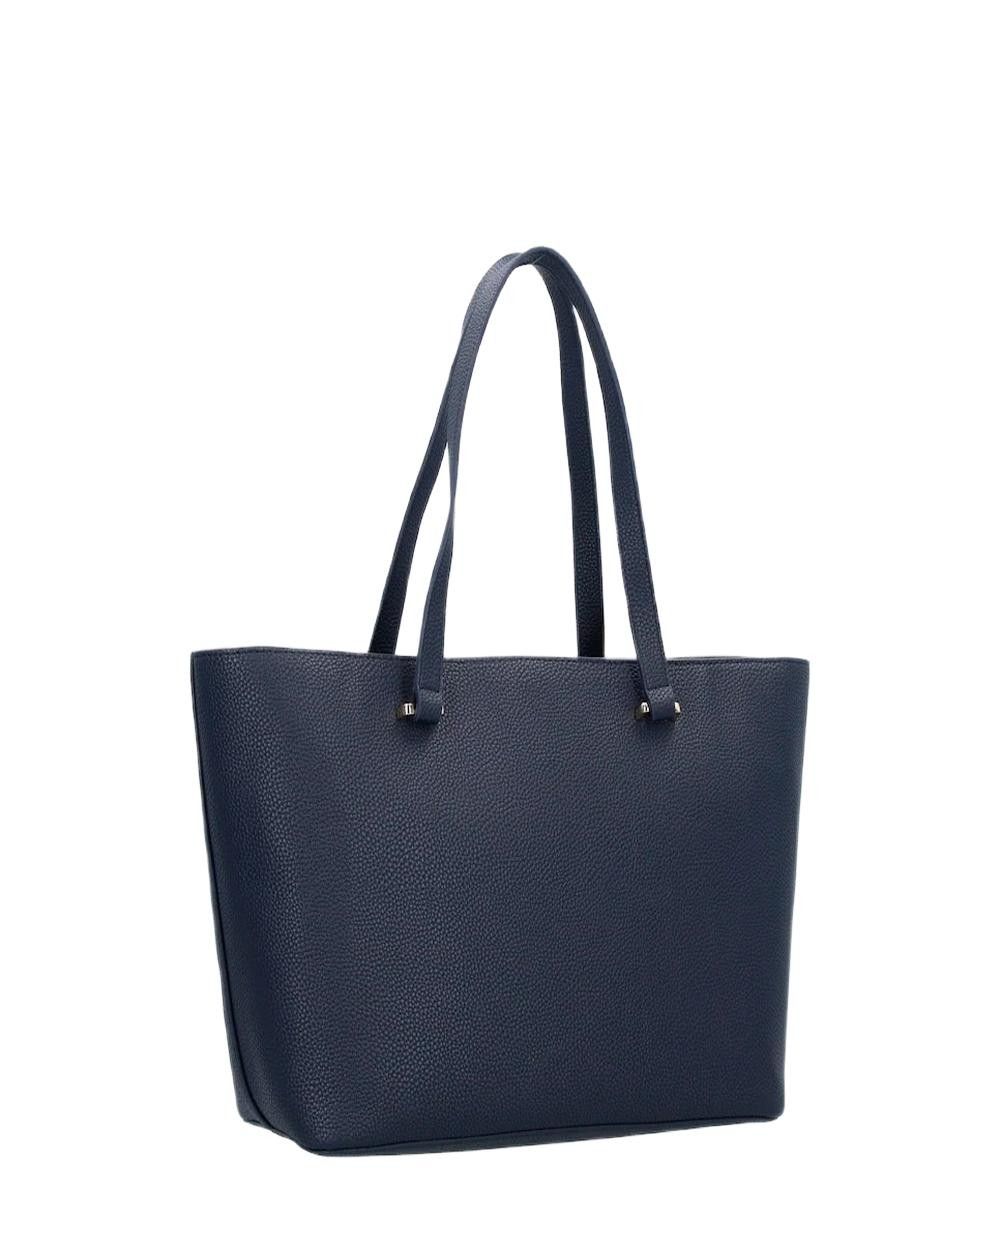 Brand: Tommy Hilfiger Gender: Women Type: Bags Season: Spring/Summer  PRODUCT DETAIL • Color: blue • Pattern: plain • Size (cm): 27 x 34 x 15 cm • Details: -handbag   COMPOSITION AND MATERIAL • Composition: -100%  polyurethane  •  Washing: machine wash at 30°